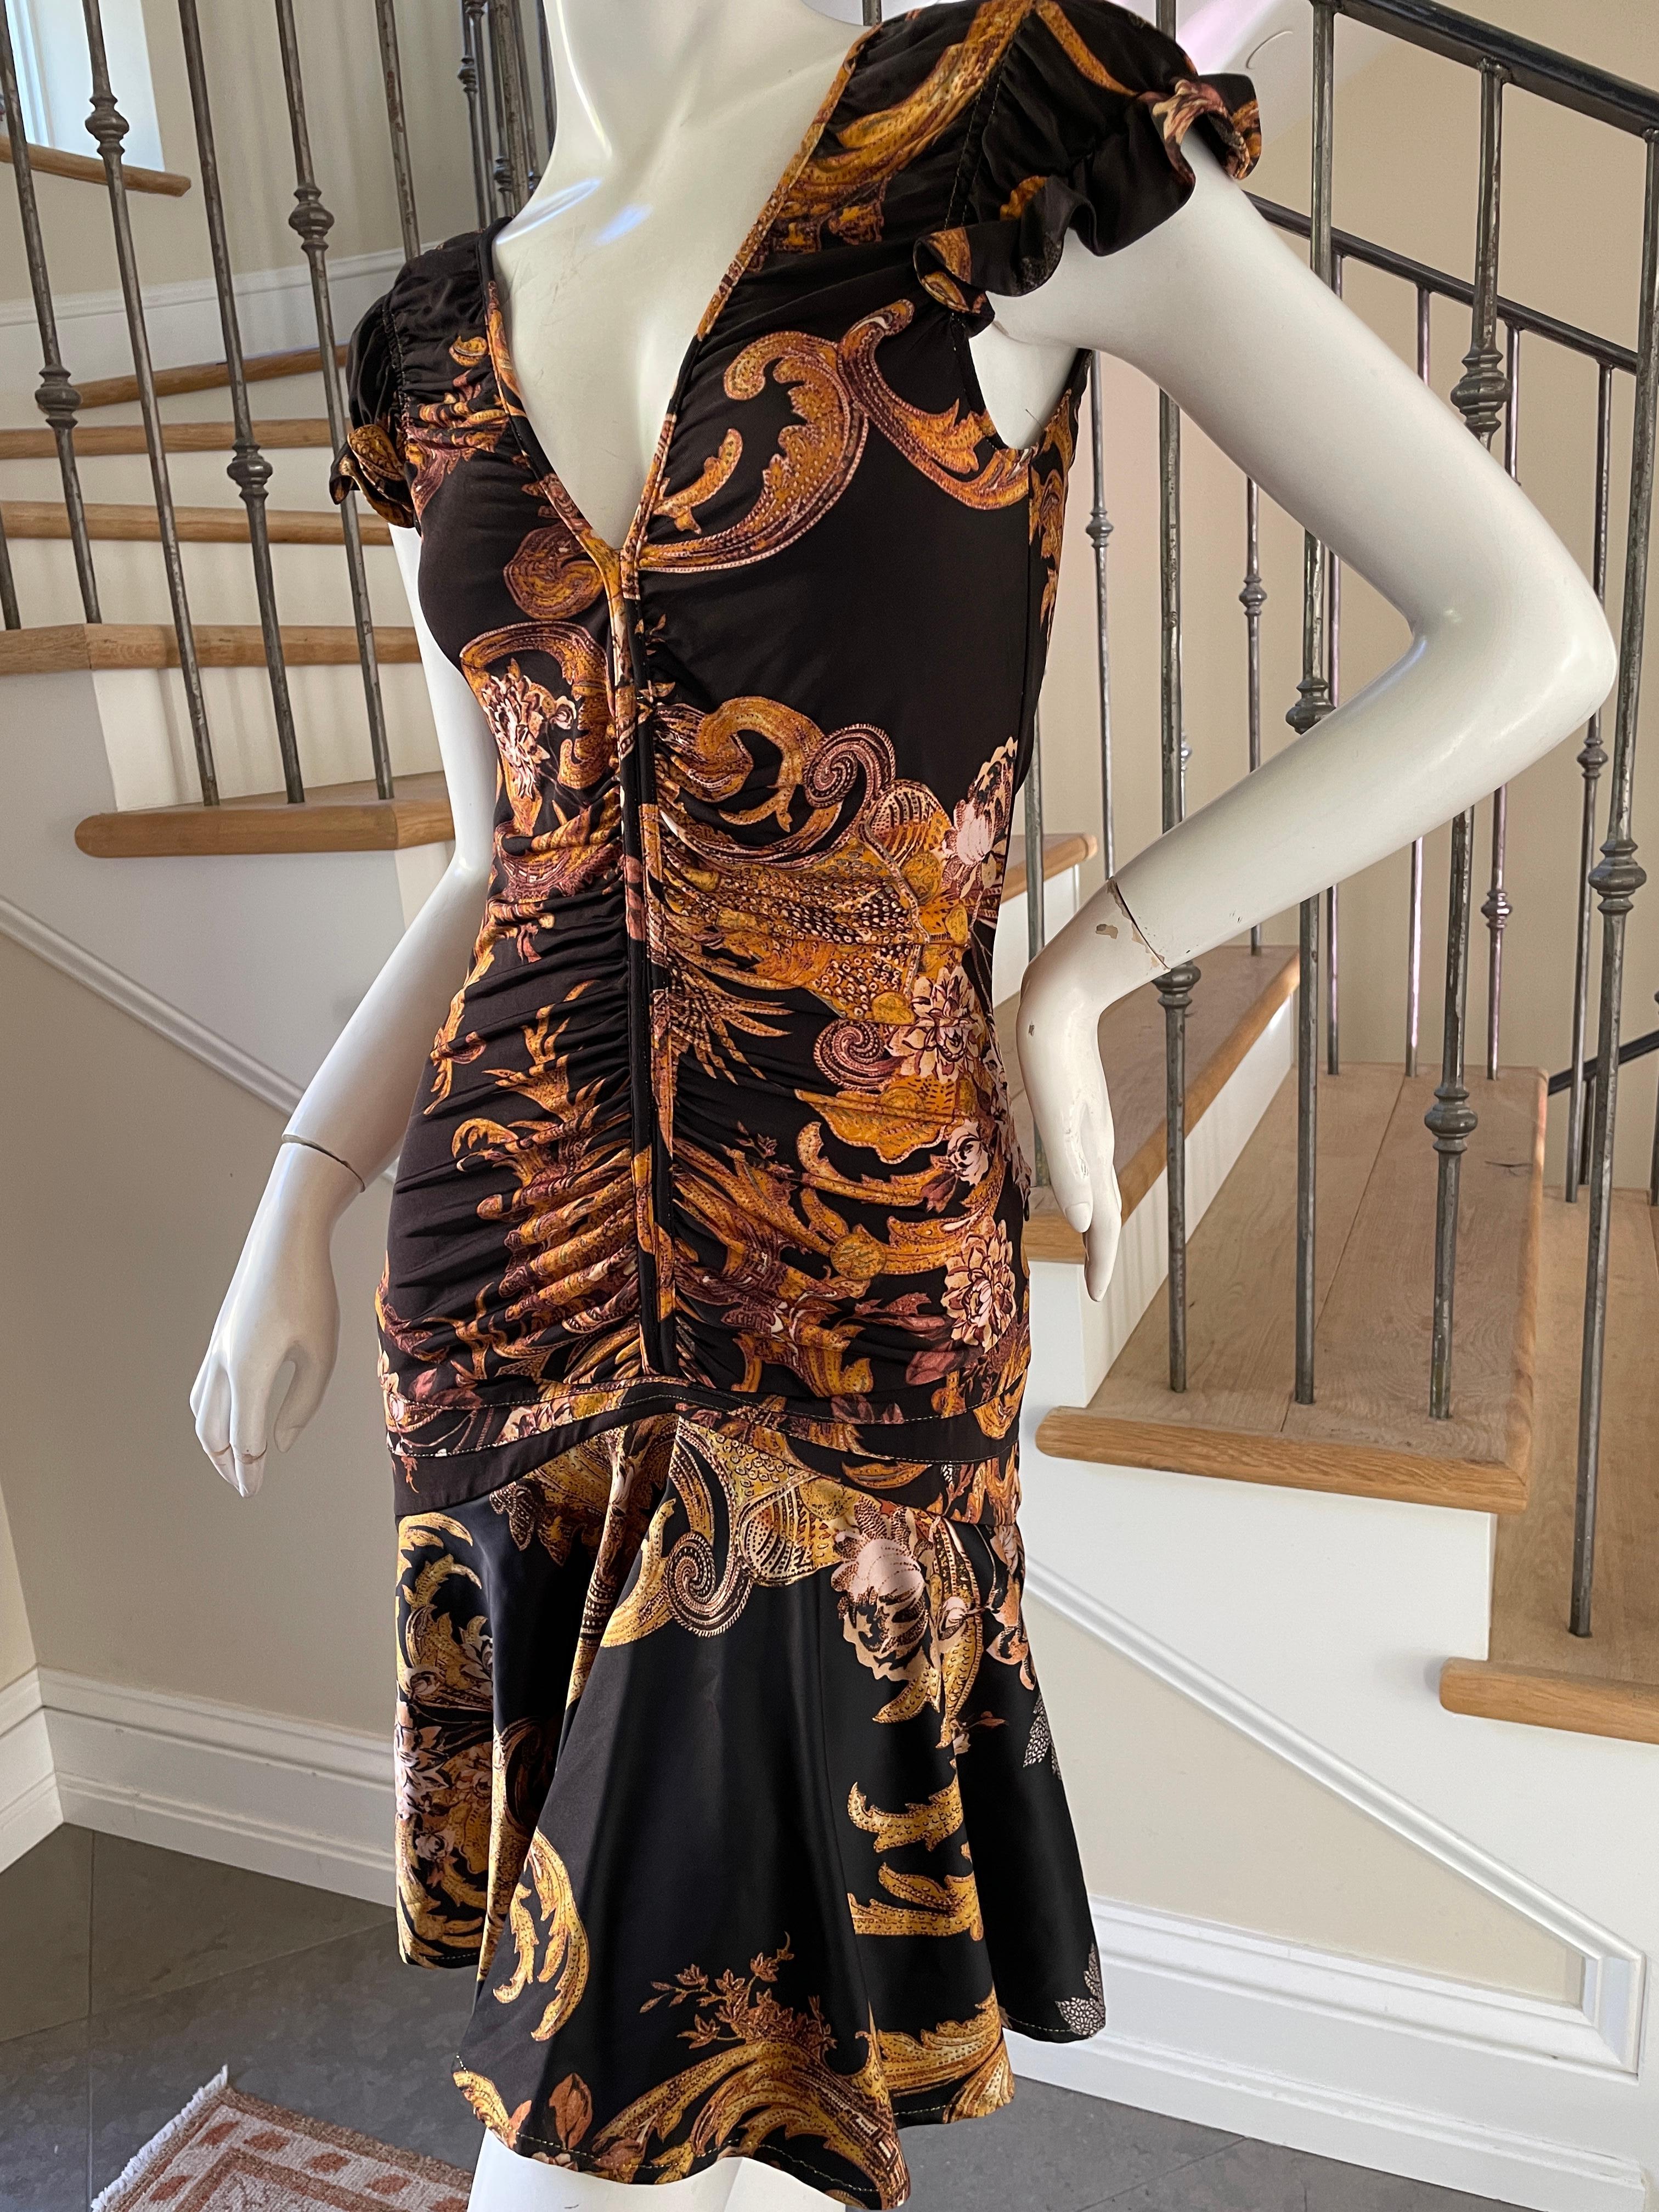 Just Cavalli Gold Baroque Pattern Low Cut Cocktail Dress by Roberto Cavalli
Size 44 Runs small
Bust 34